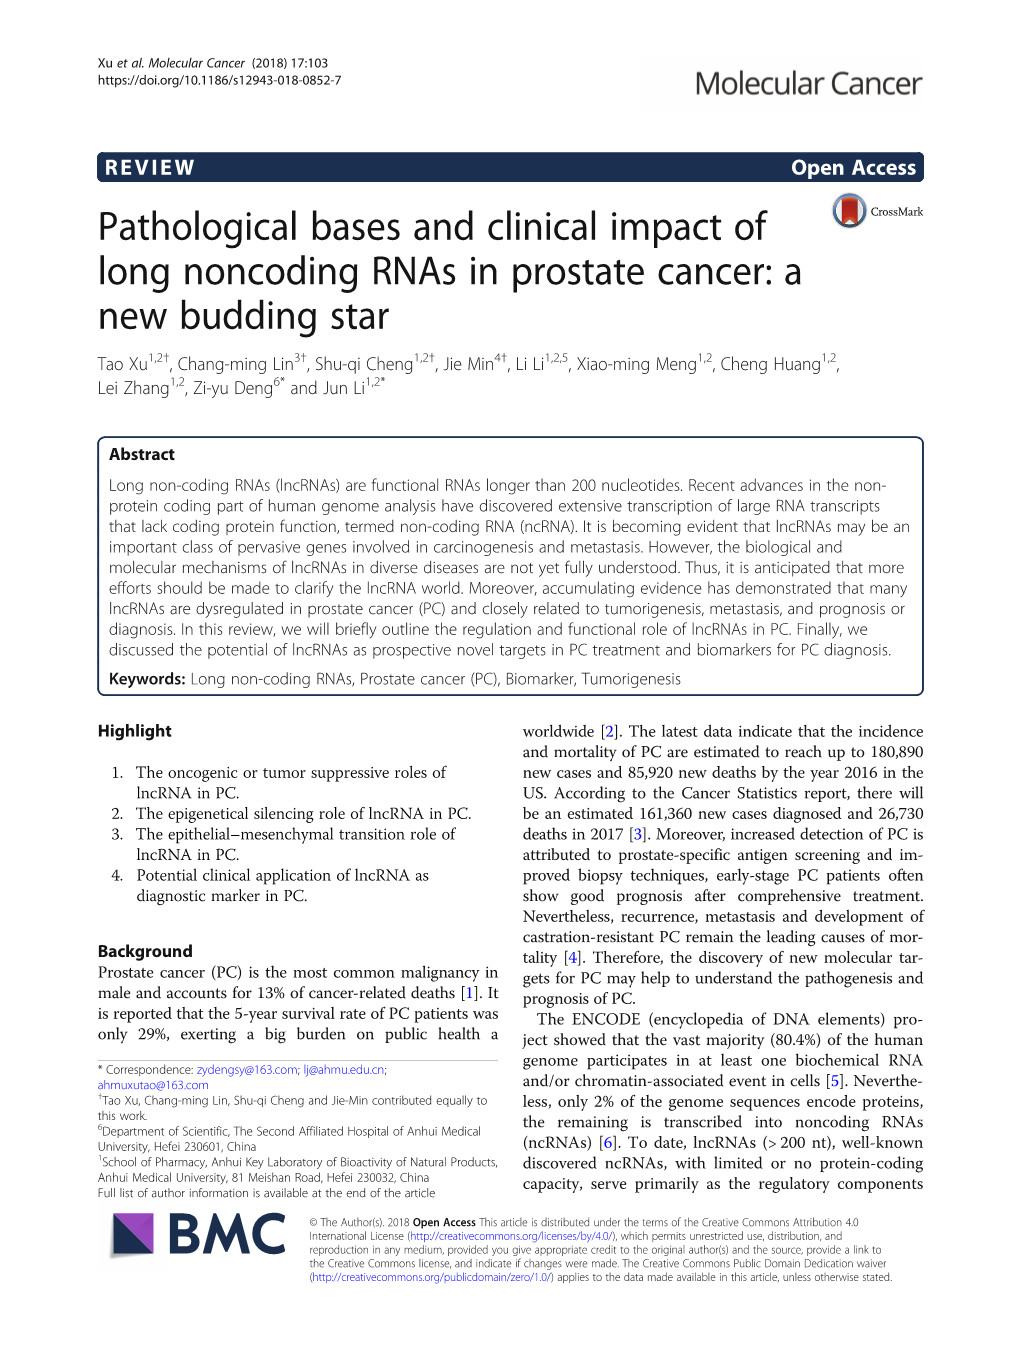 Pathological Bases and Clinical Impact of Long Noncoding Rnas in Prostate Cancer: a New Budding Star